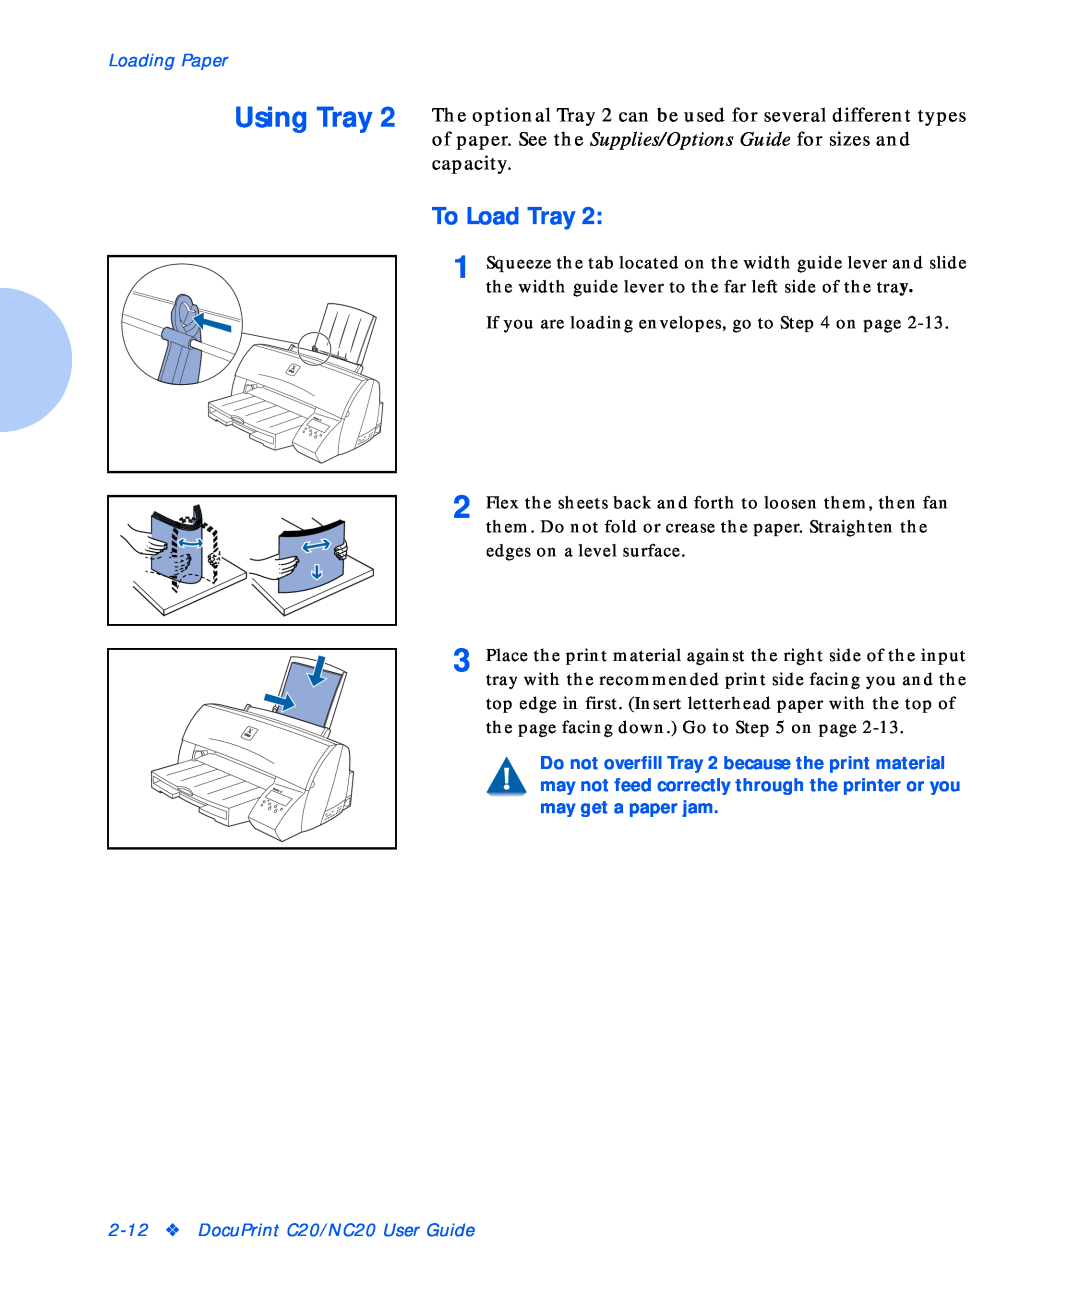 Xerox manual To Load Tray, capacity, Loading Paper, DocuPrint C20/NC20 User Guide 